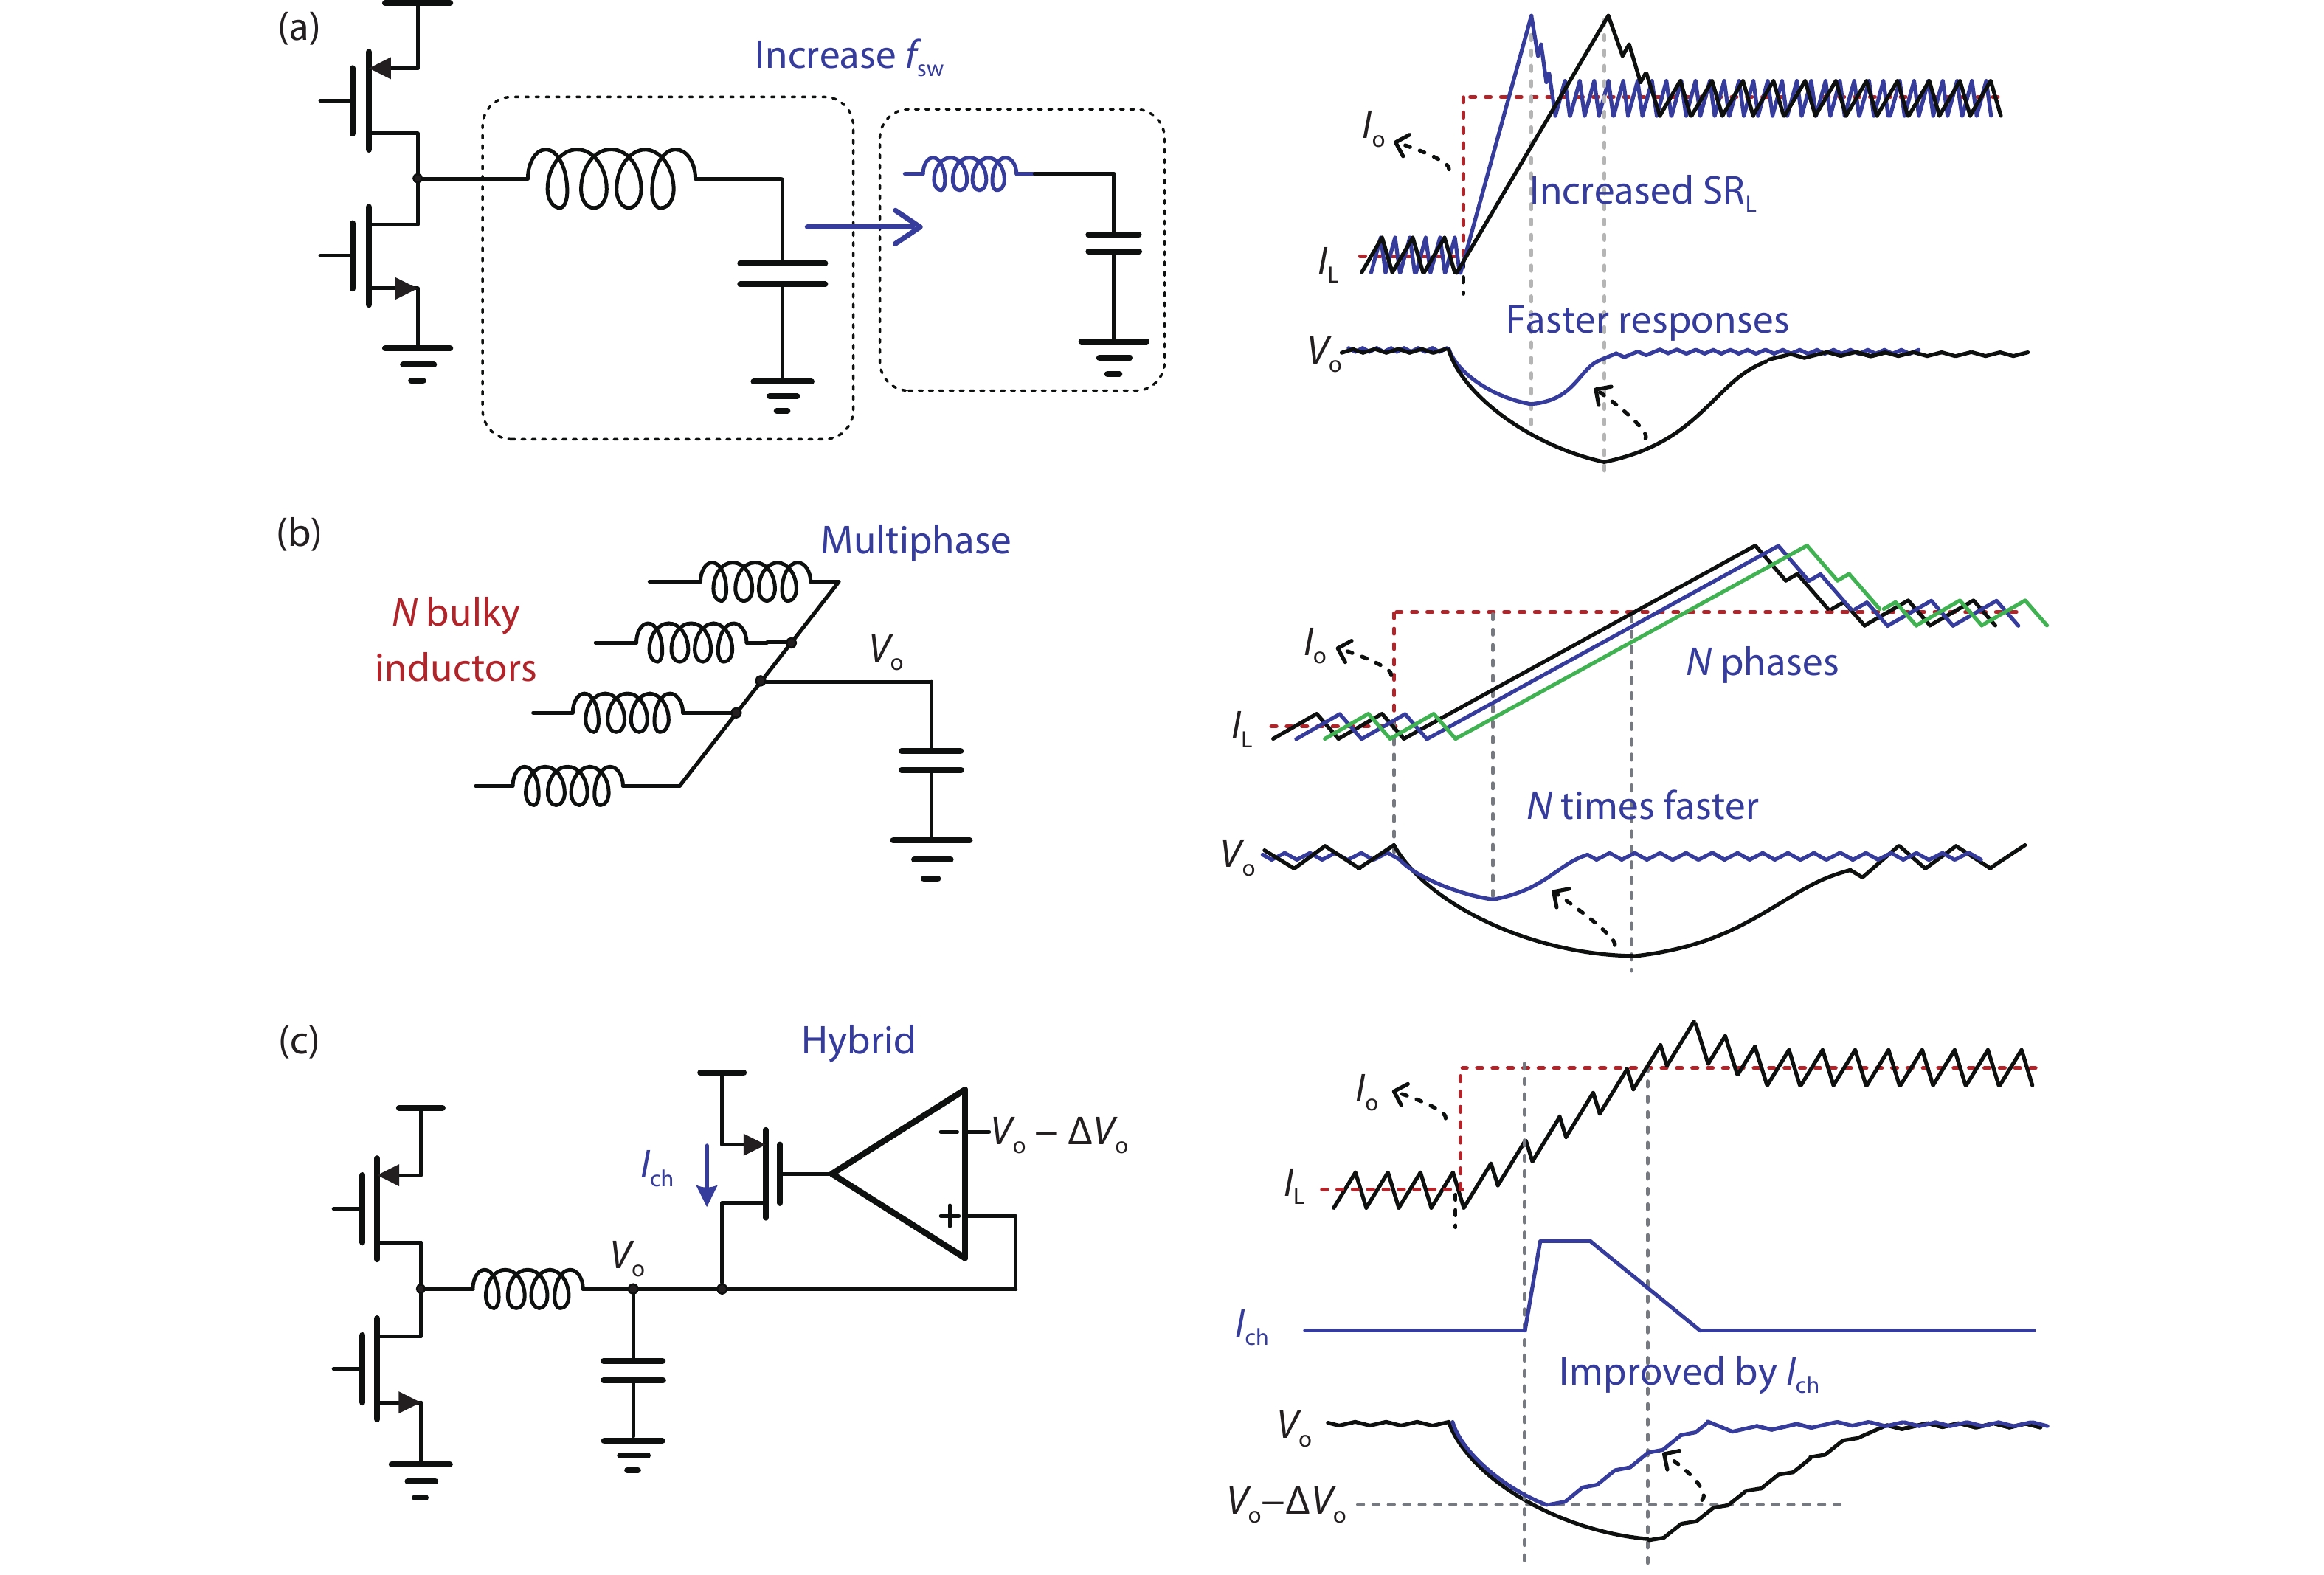 (Color online) Techniques to overcome the limitation of slew rate of the inductor current (SRL): (a) increasing switching frequency, (b) multiphase topology, (c) hybrid scheme.